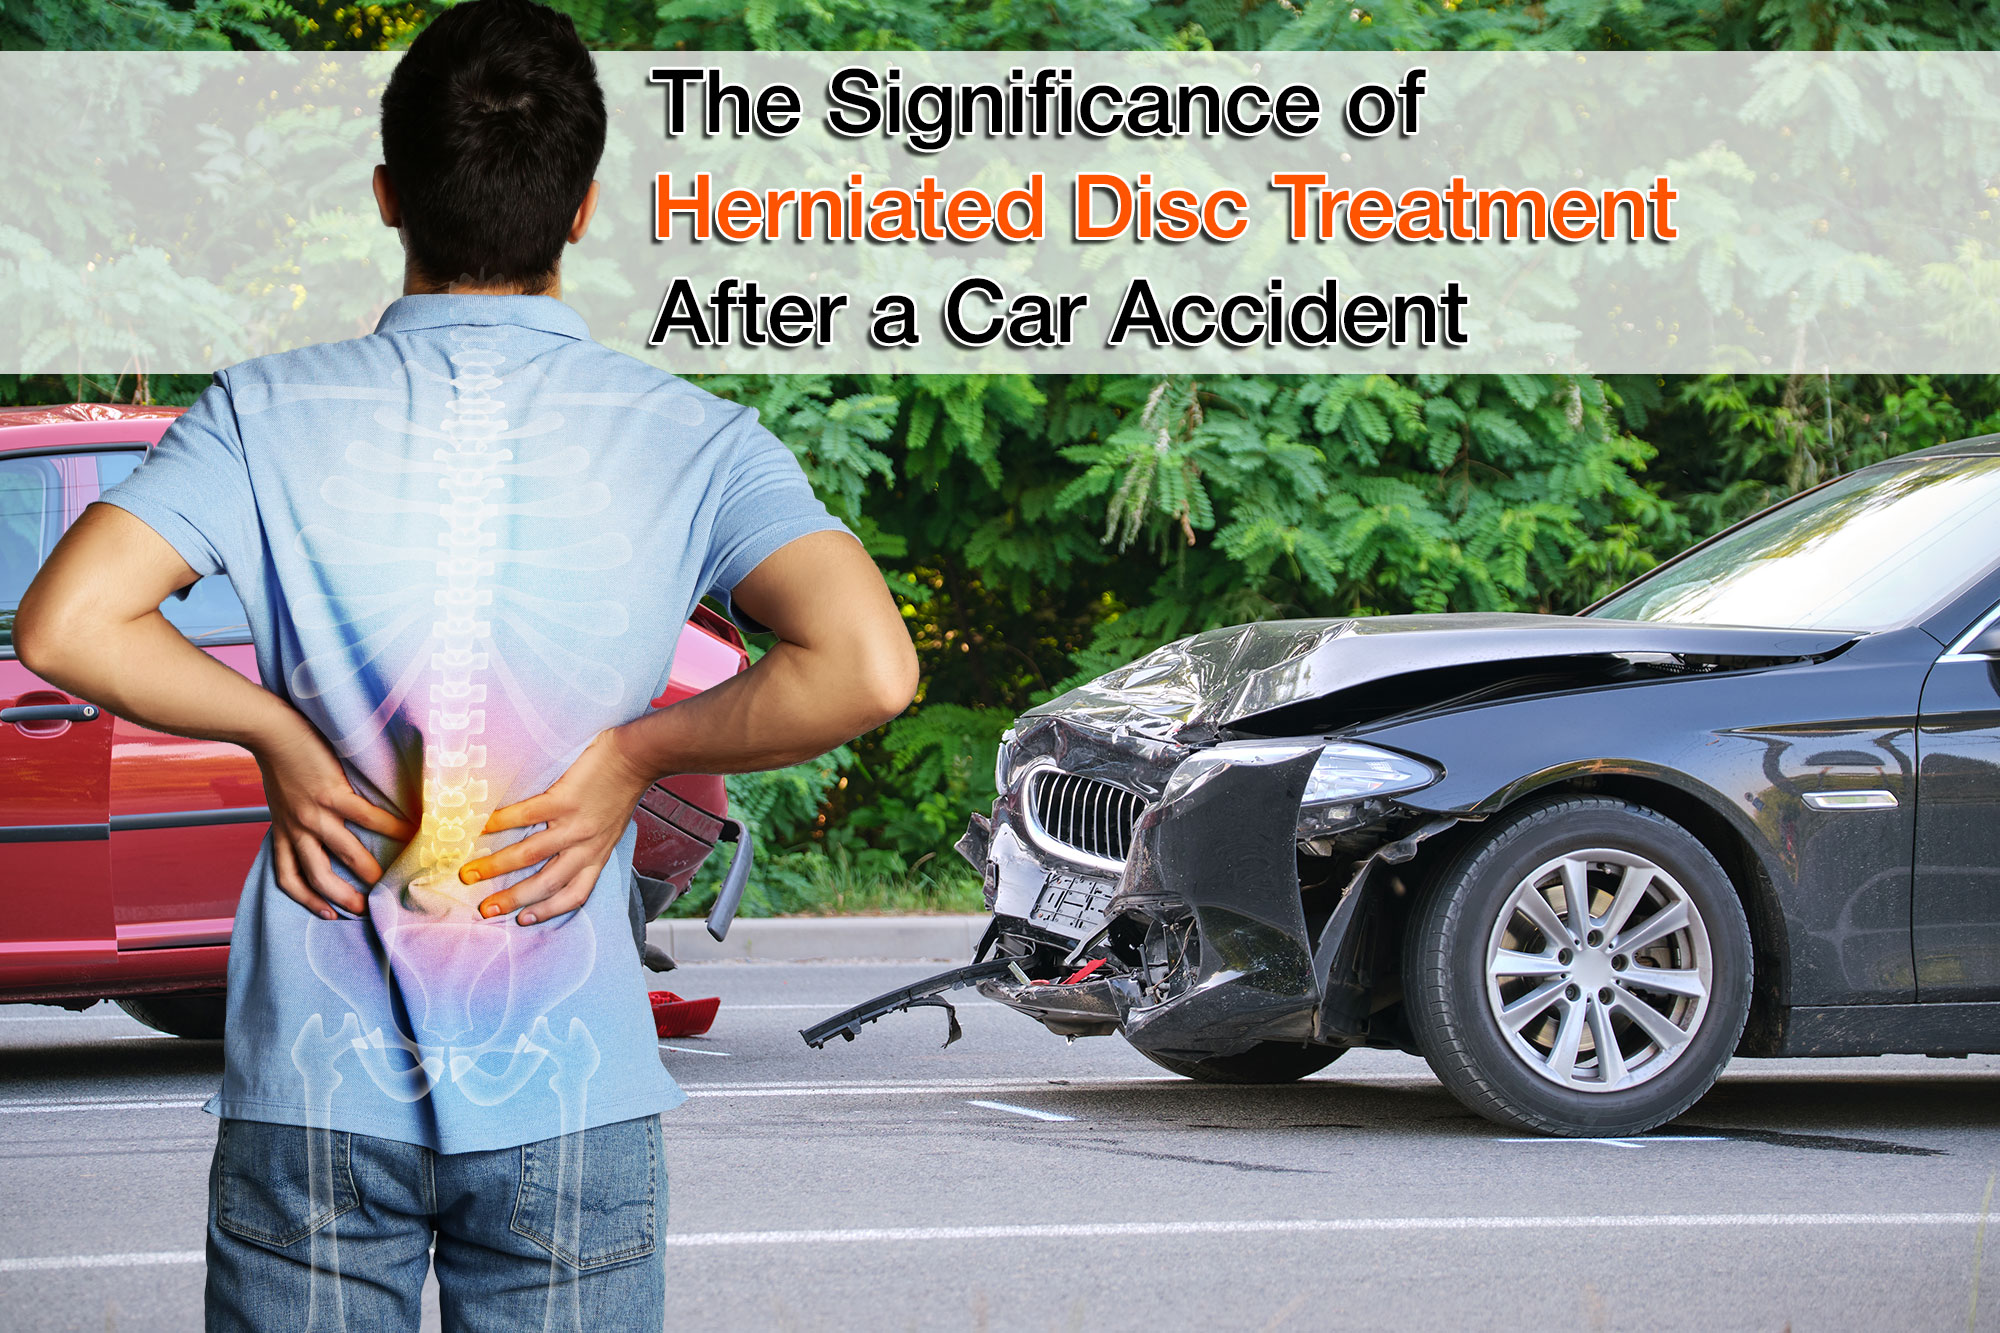 Accident recovery center | Galiny Chiropractic and massage kent, federal way